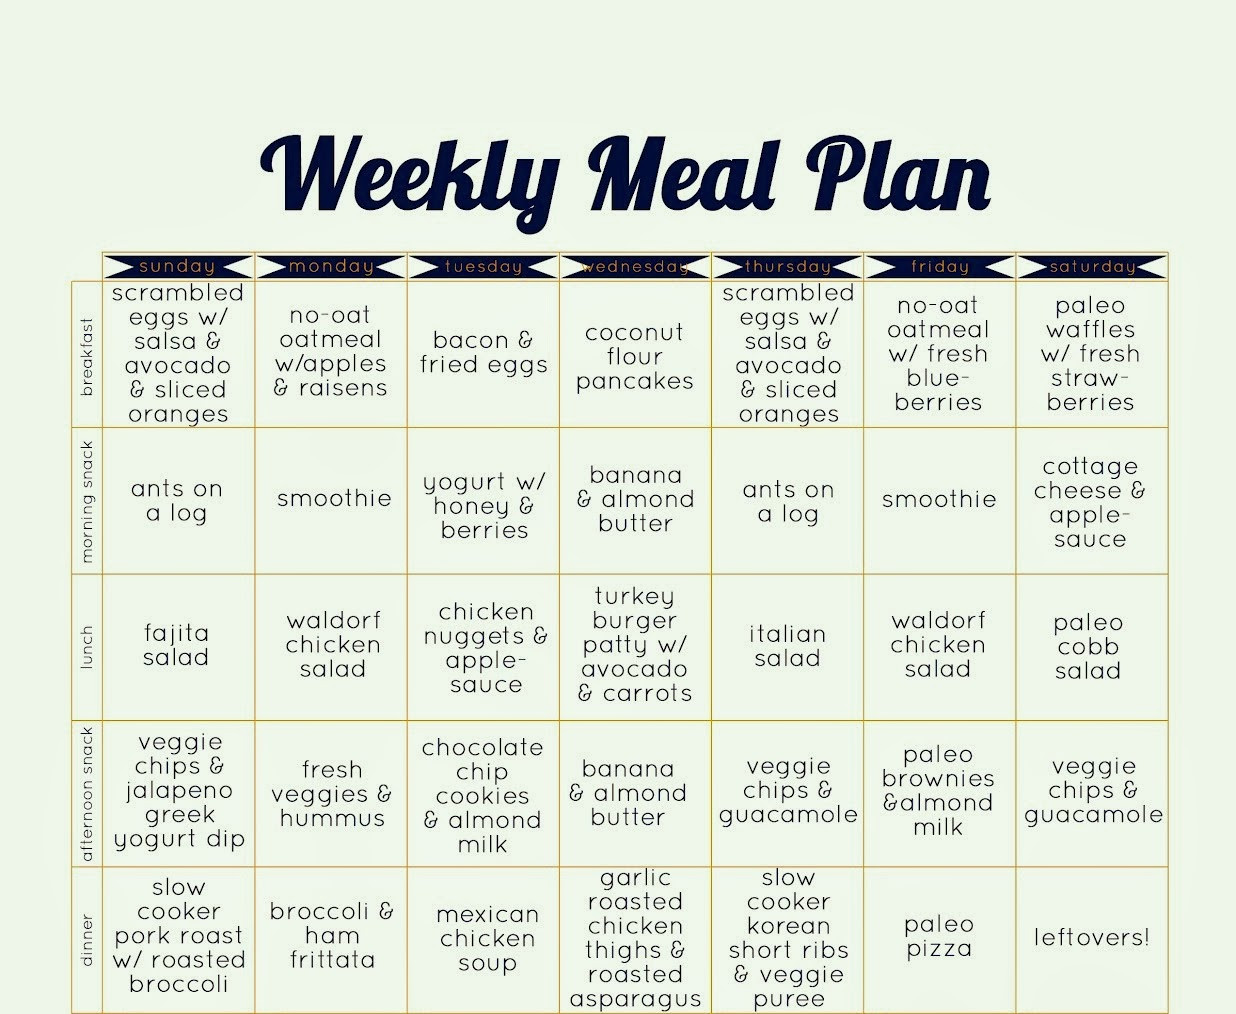 Paleo Diet Weight Loss Meal Plan
 Looking for an ideal paleo t meal plan The Paleo